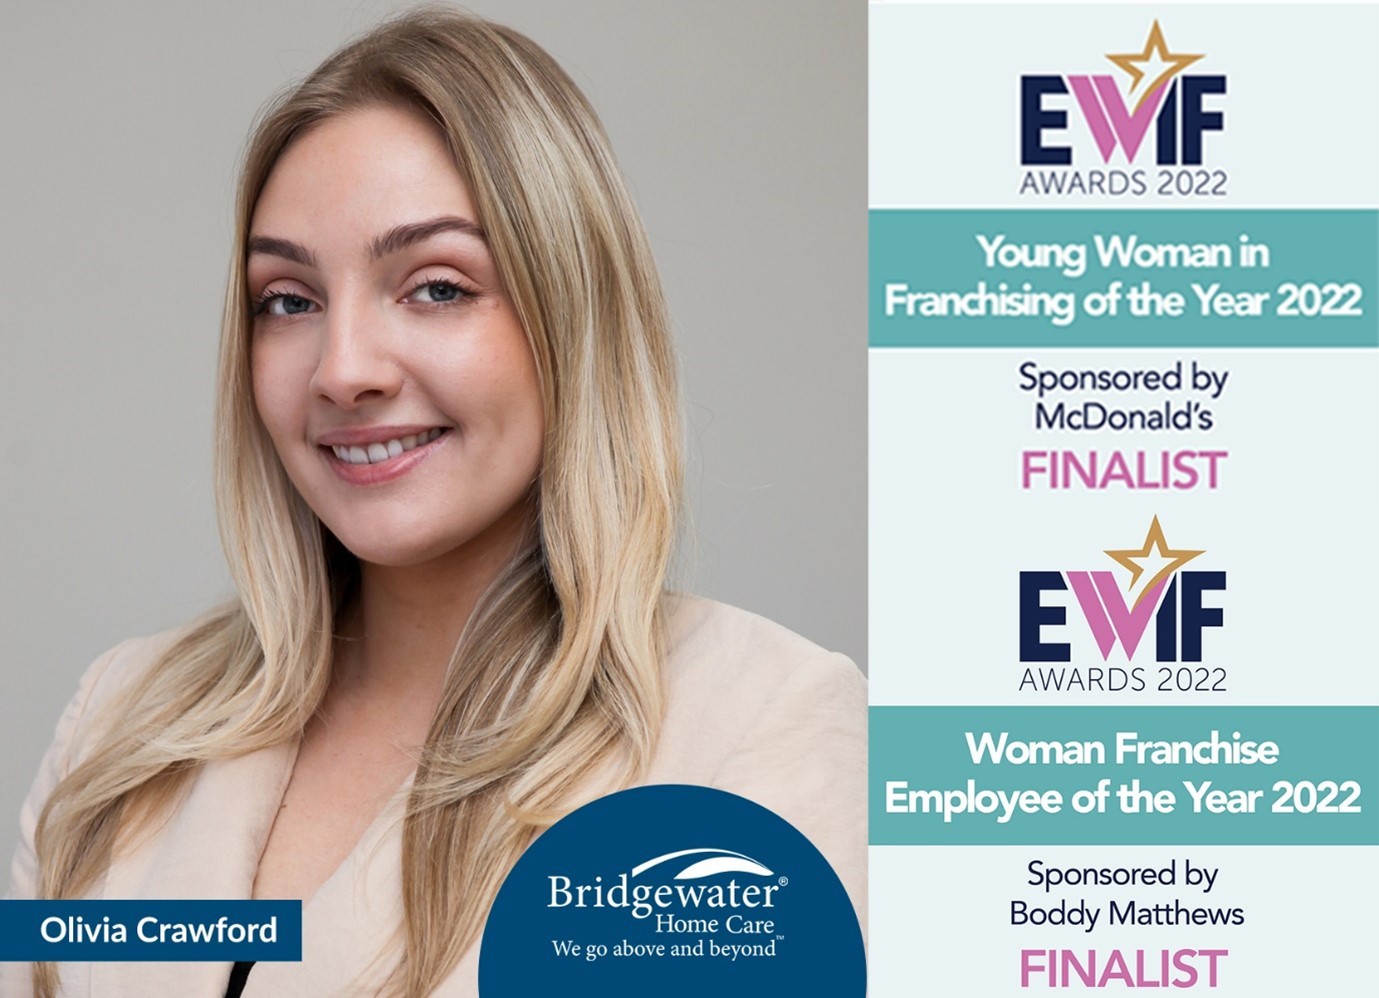 Onto the EWIF awards finals for Bridgewater Home Care!